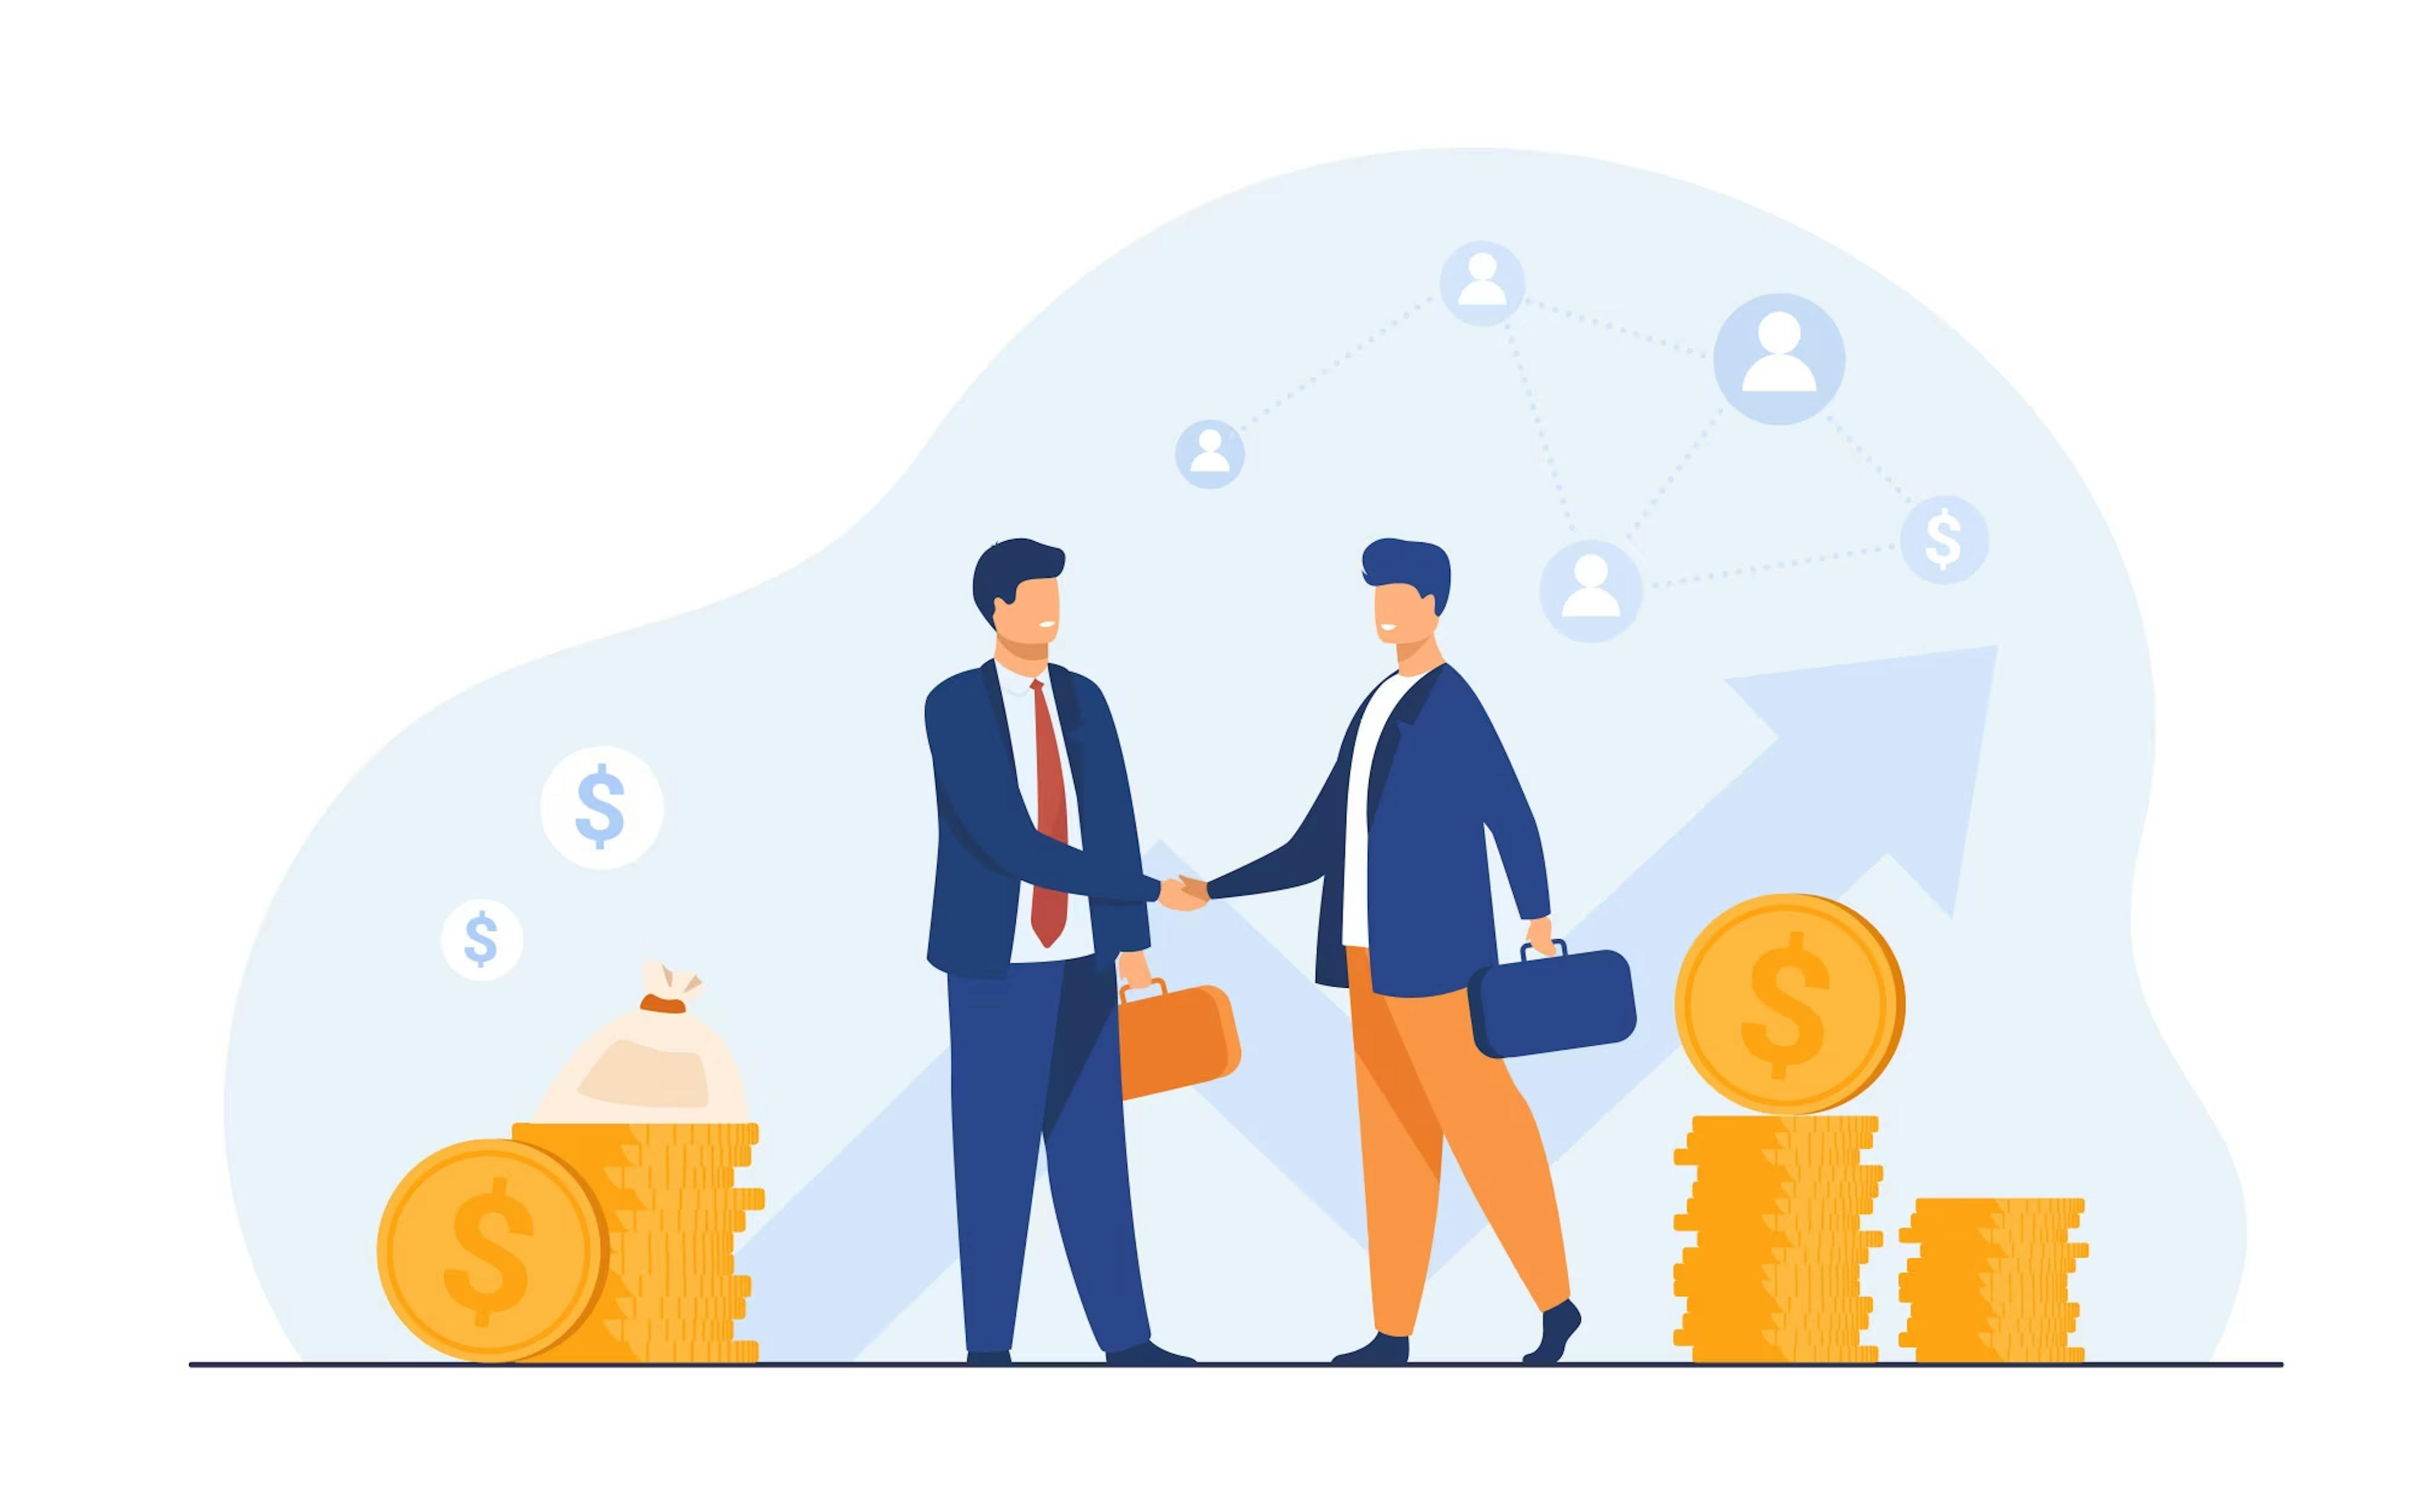 https://www.freepik.com/free-vector/two-business-partners-handshaking_9176945.htm#query=business%20partner&position=0&from_view=search&track=aisrce 